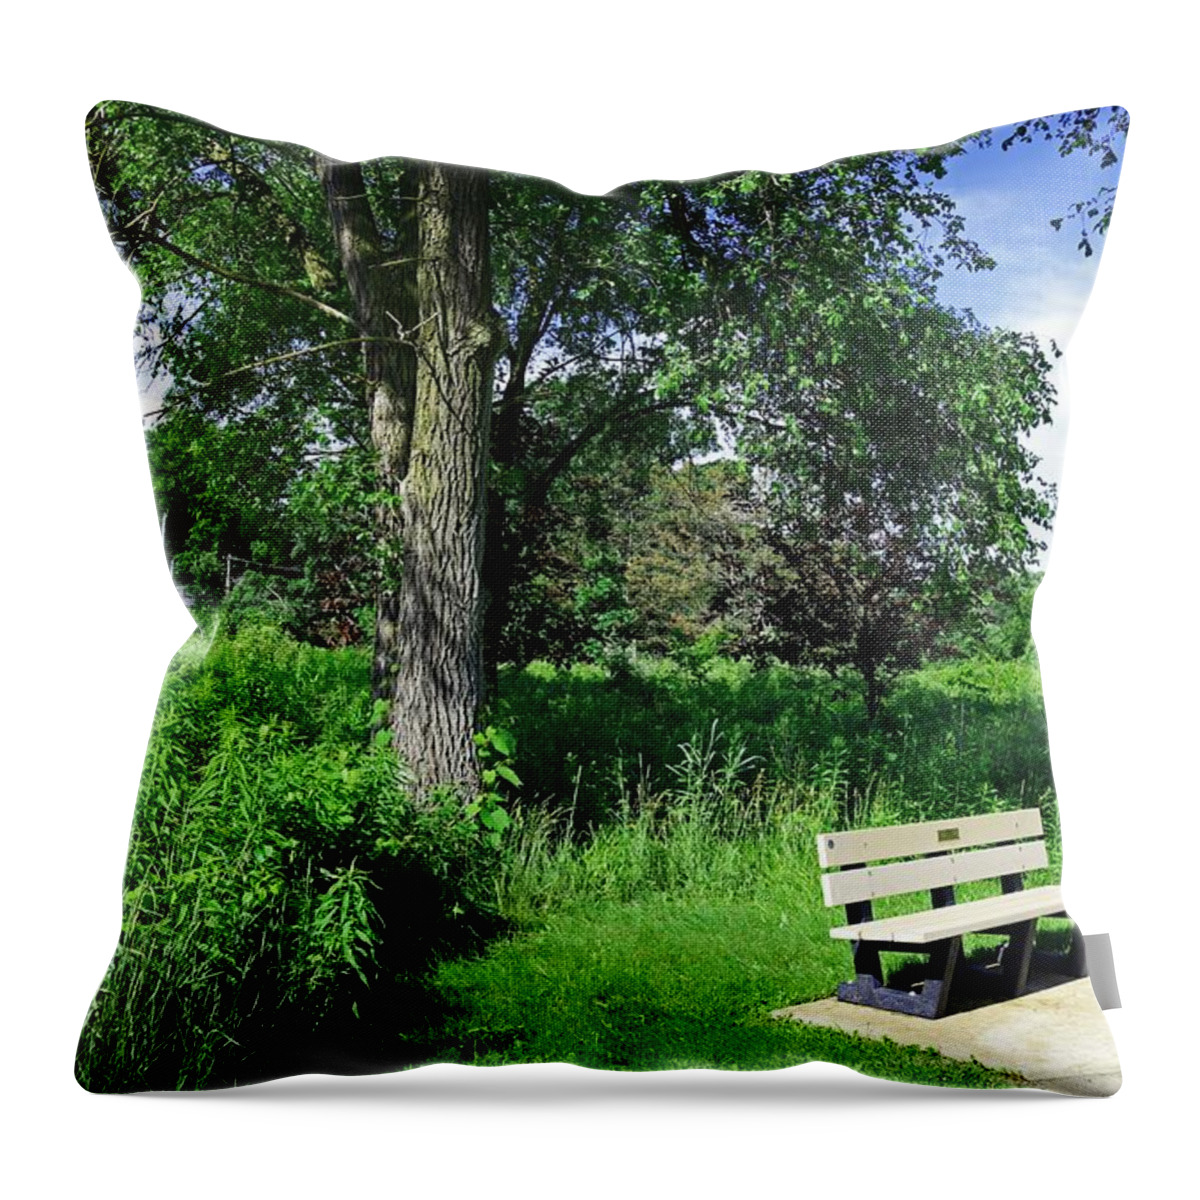 Trees Throw Pillow featuring the photograph Introspective Analysis by Michiale Schneider